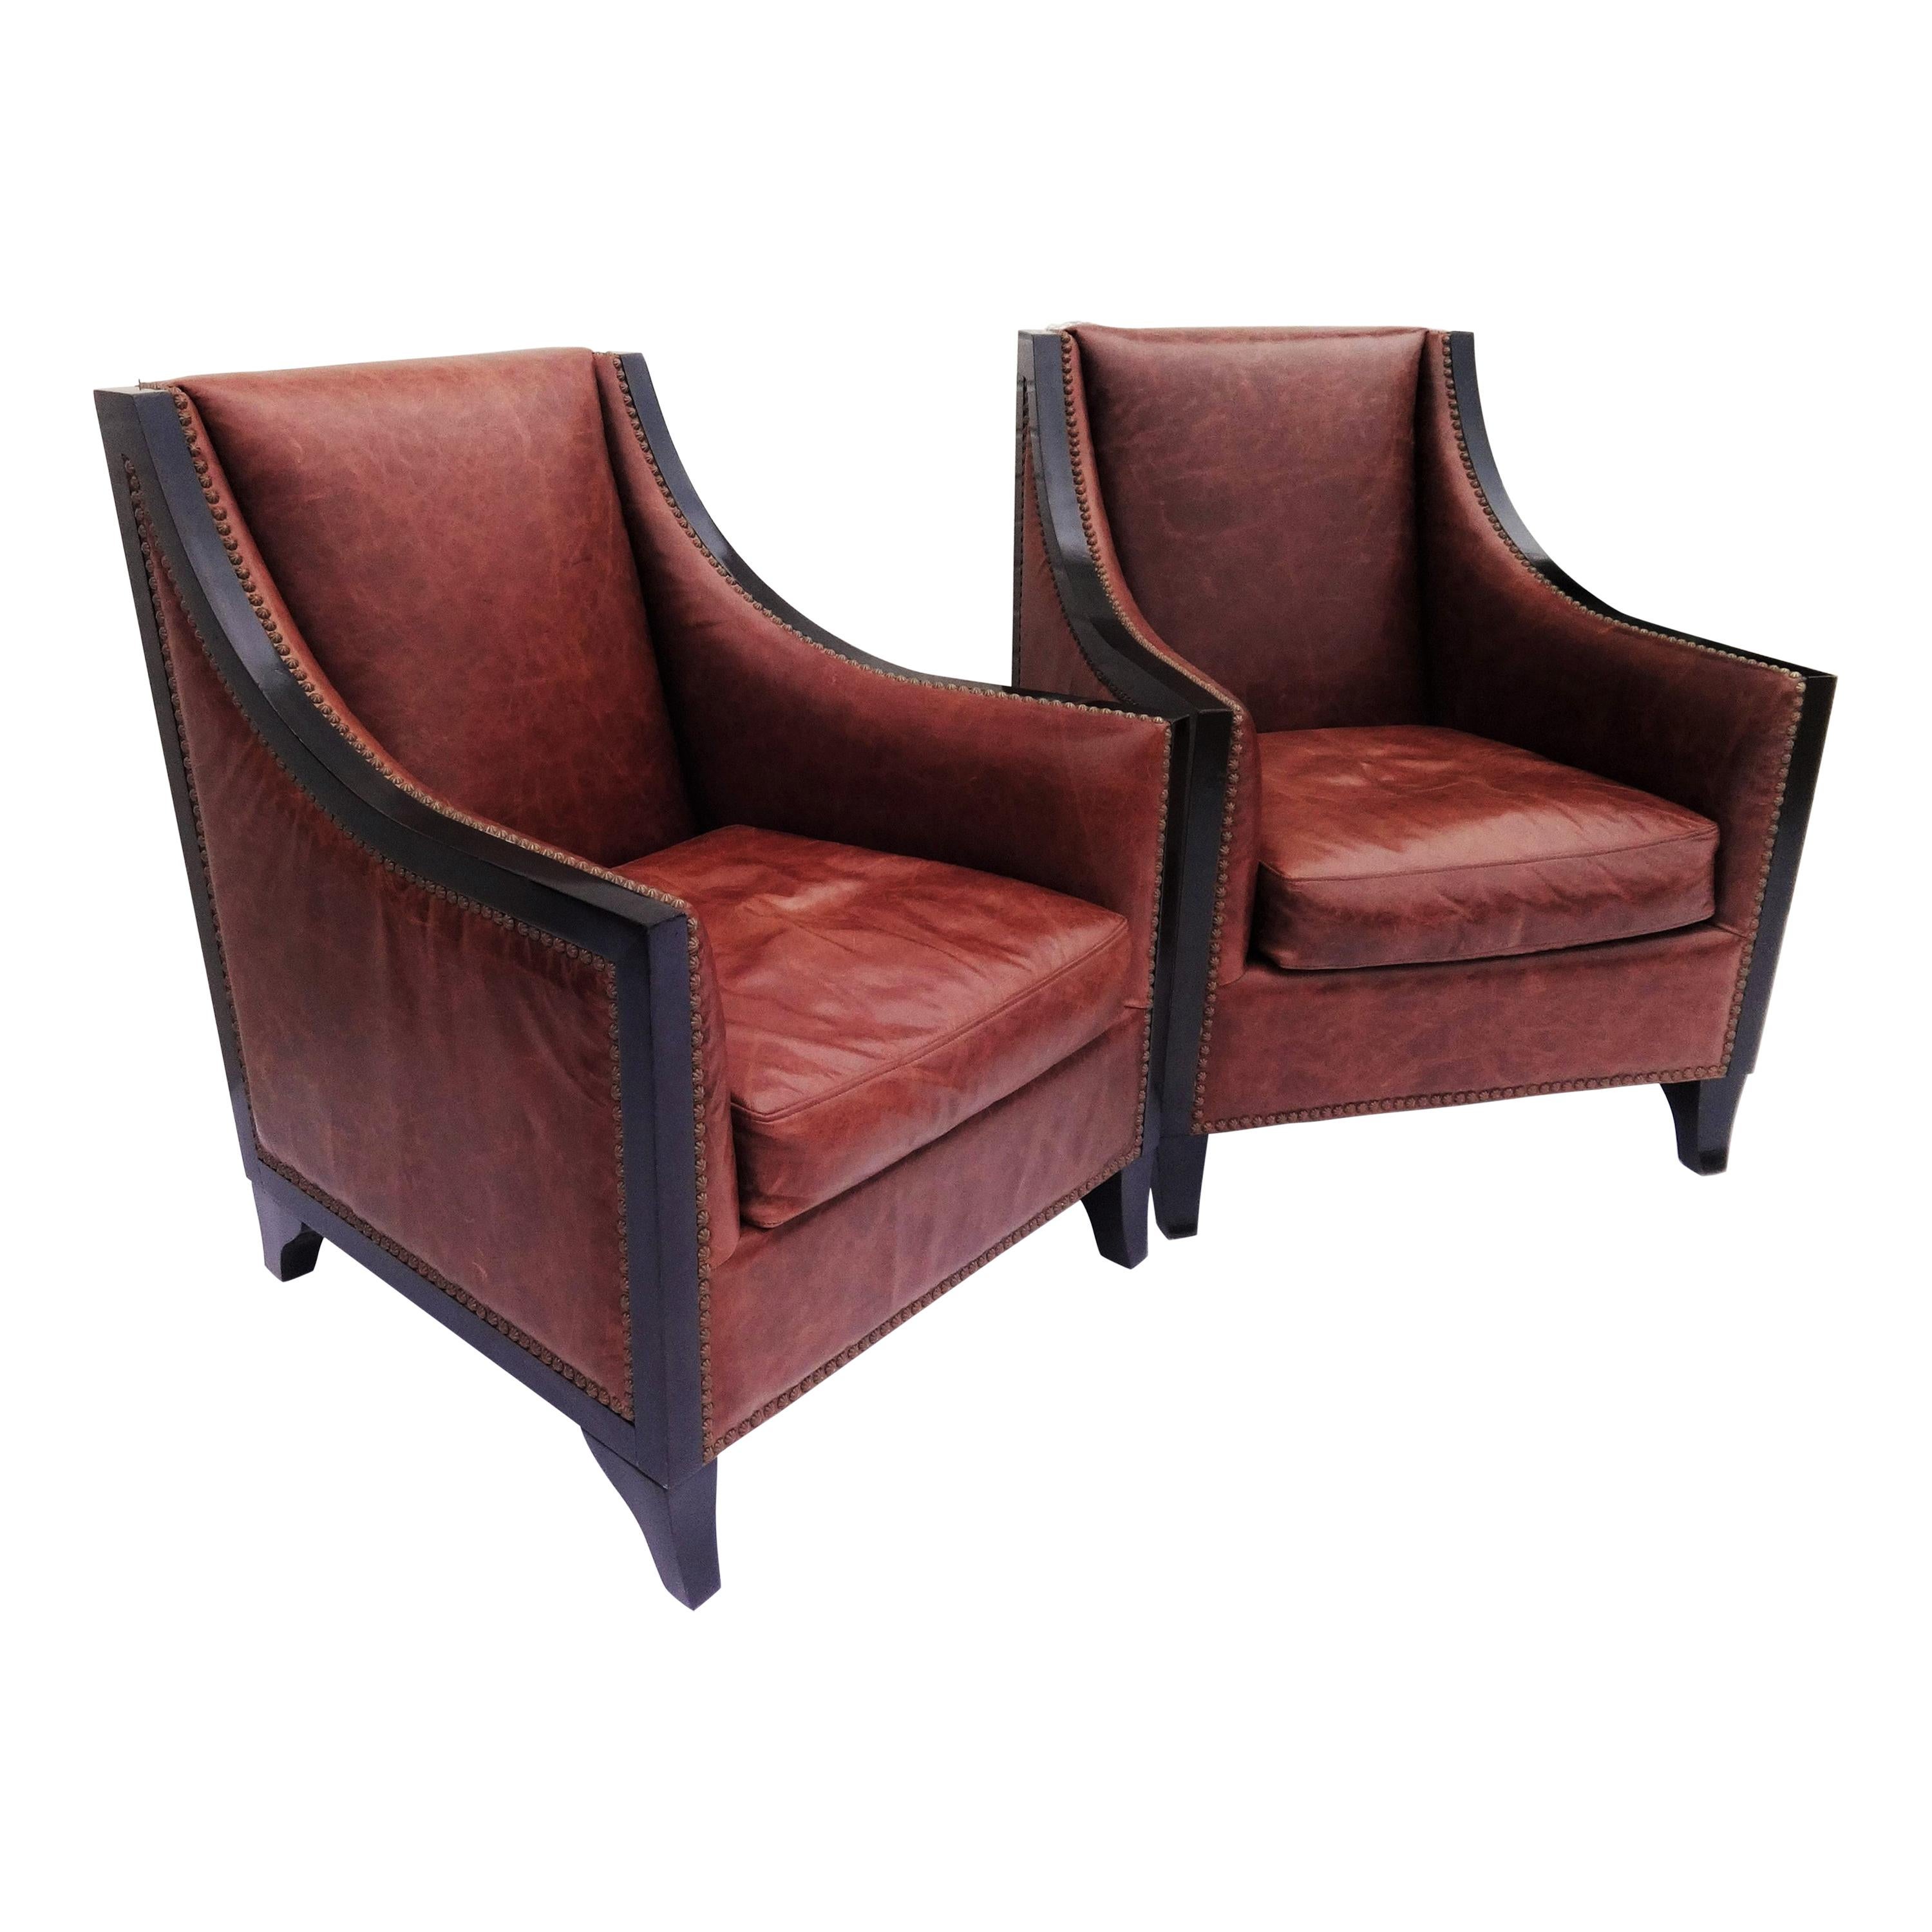 Pair of Cognac Leather Lounge Chairs